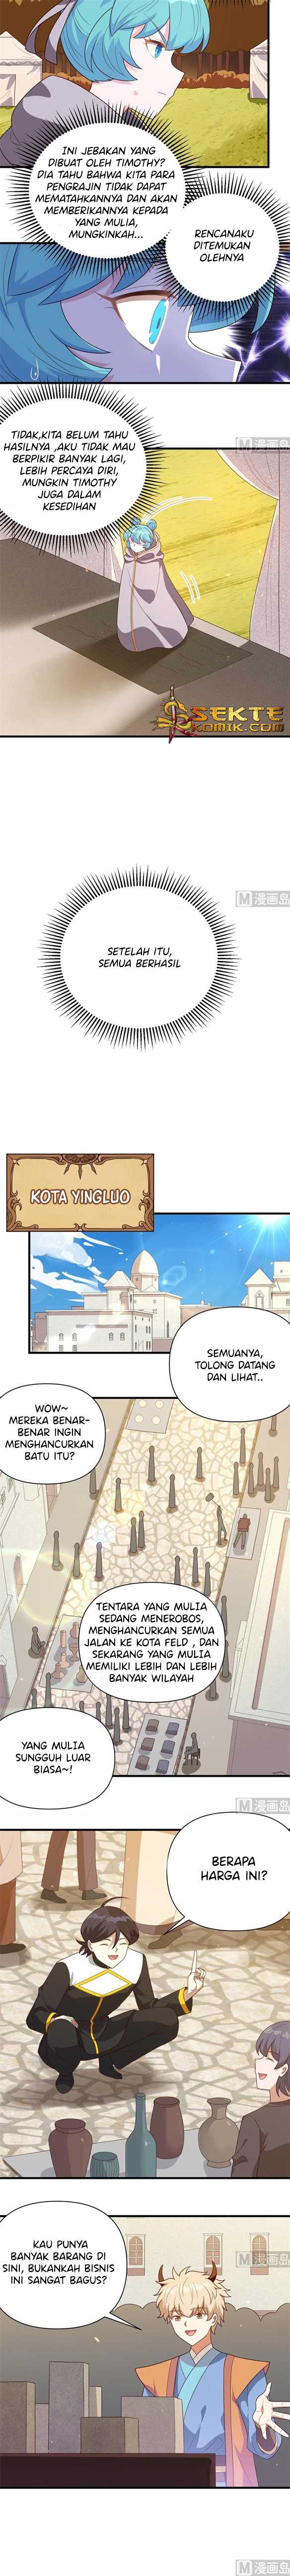 To Be The Castellan King Chapter 356